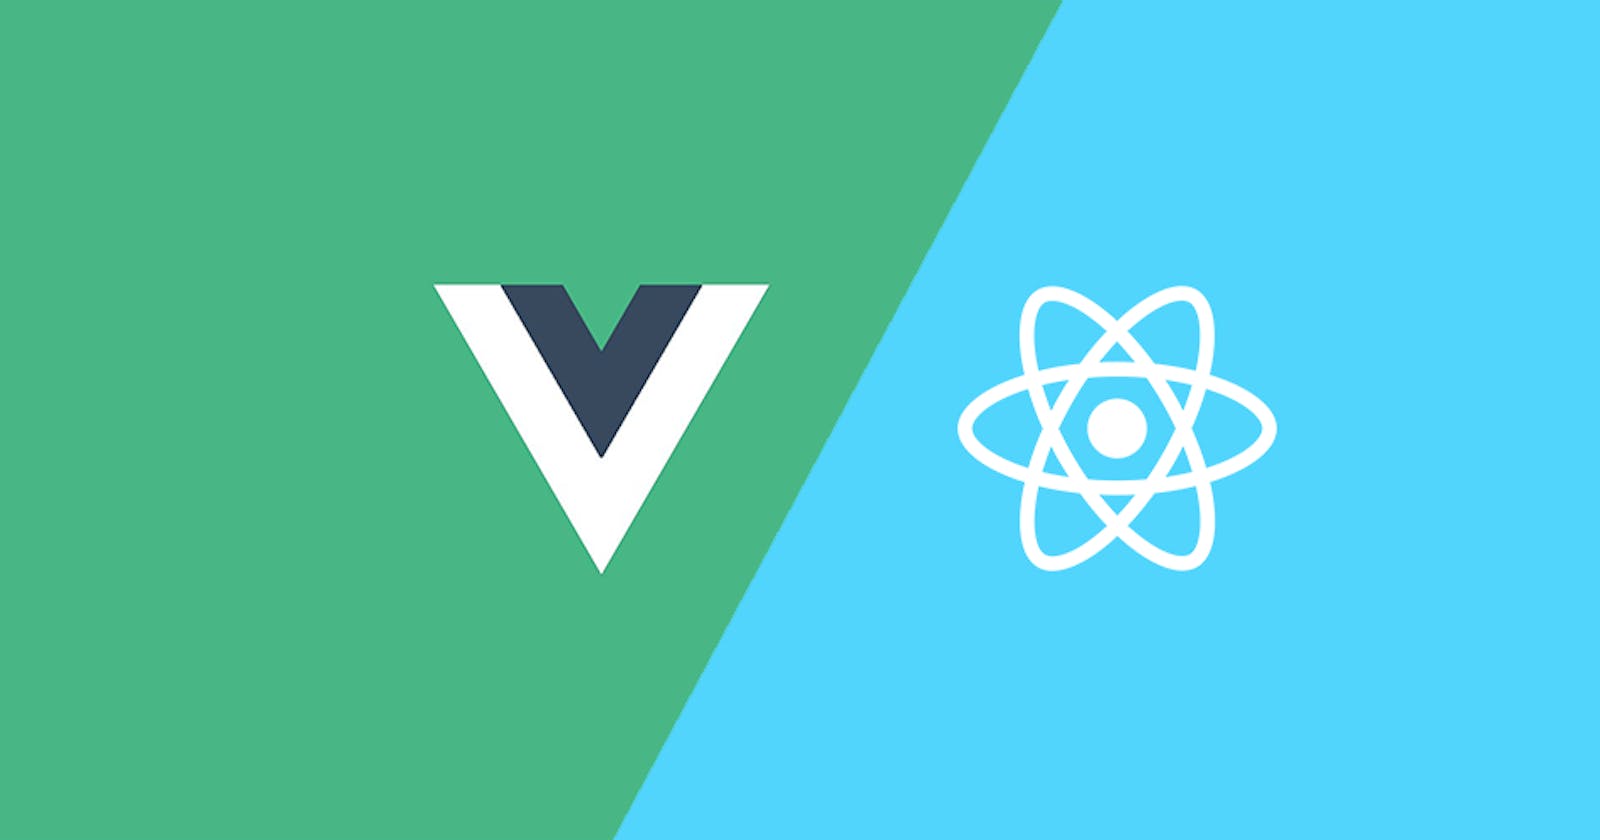 Deploying Your React or Vue Project To Glitch